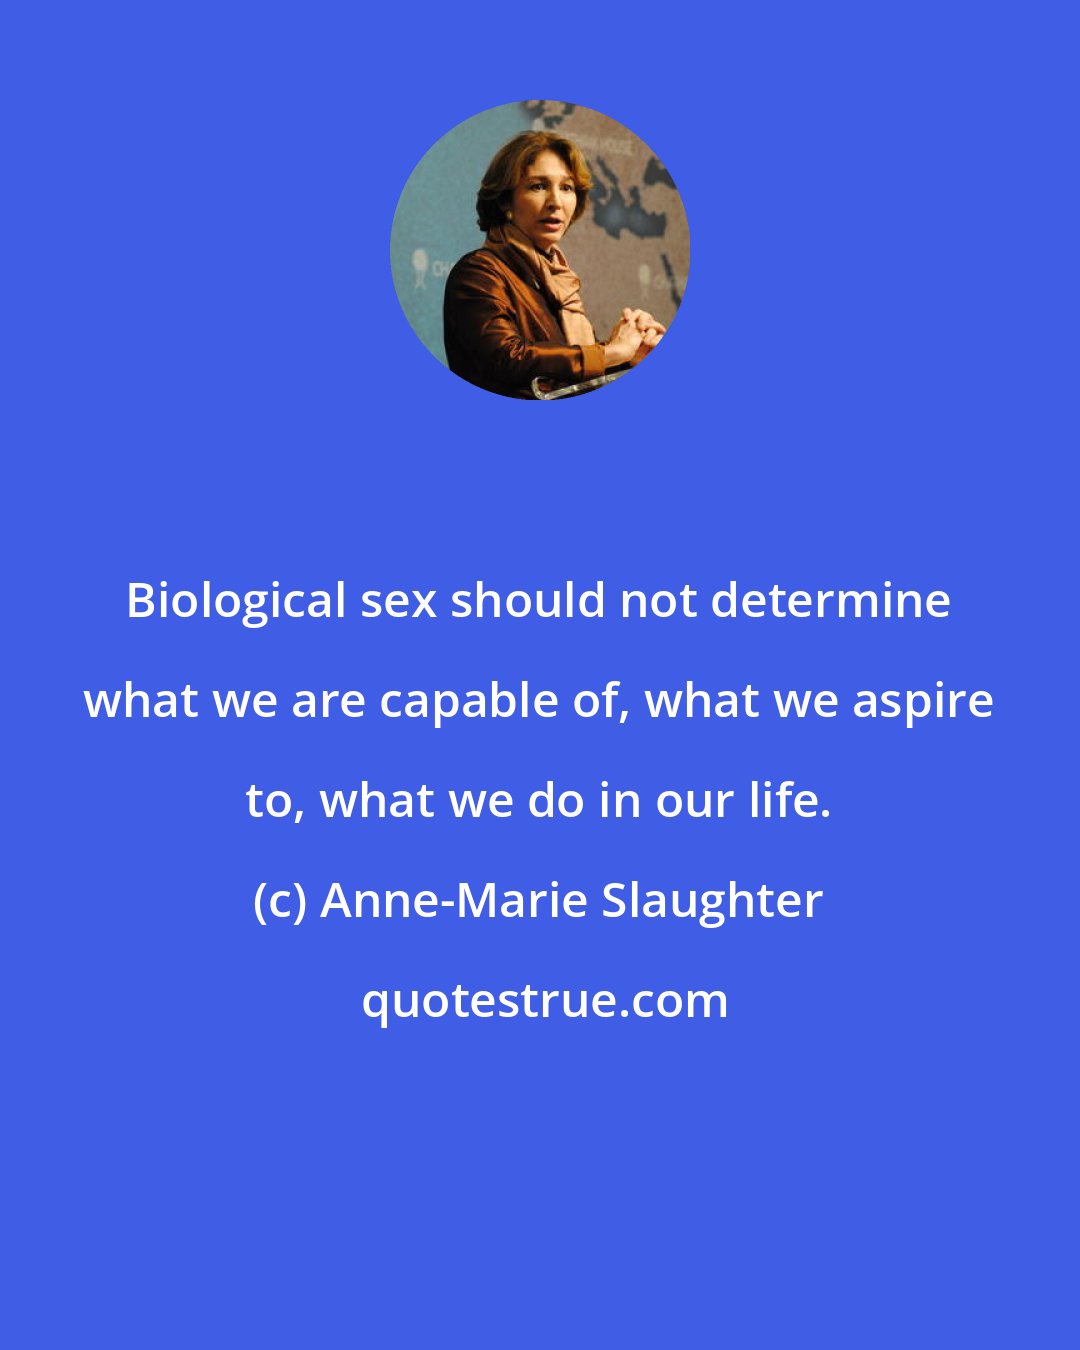 Anne-Marie Slaughter: Biological sex should not determine what we are capable of, what we aspire to, what we do in our life.